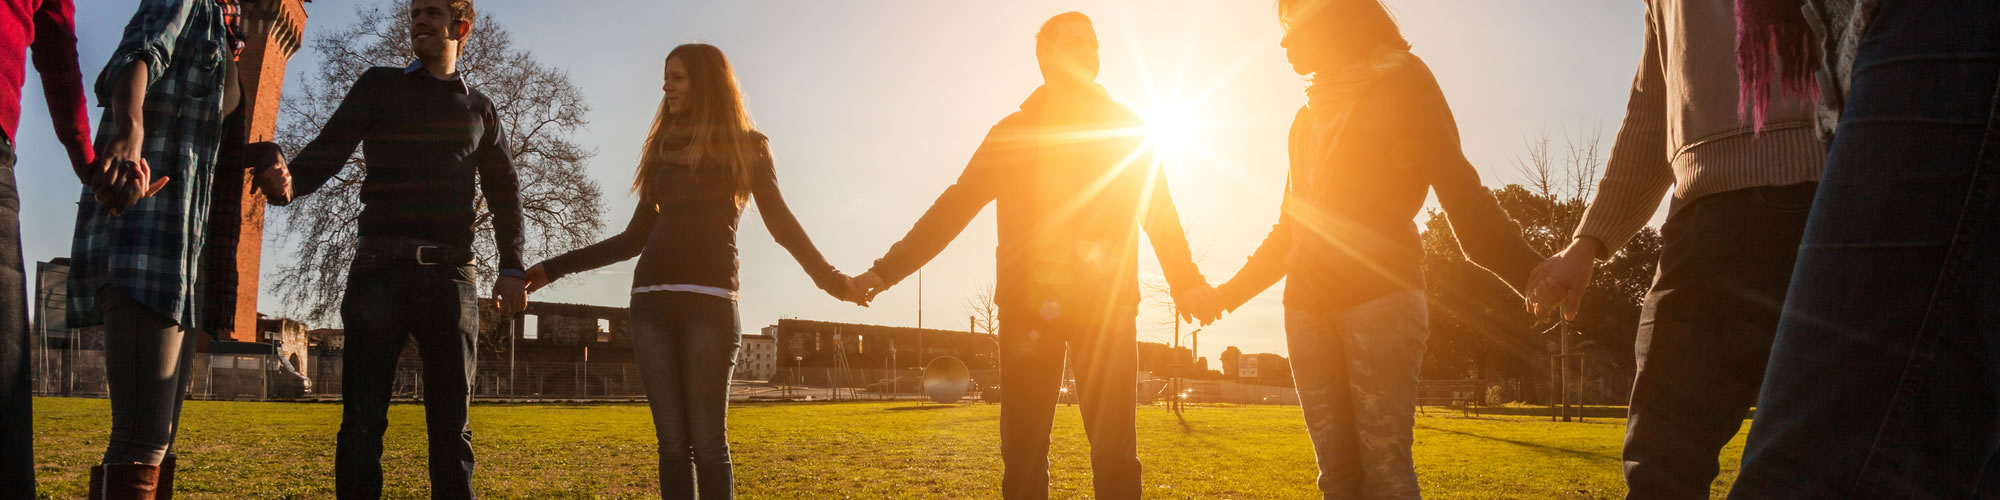 Group of people holding hands in the setting sun